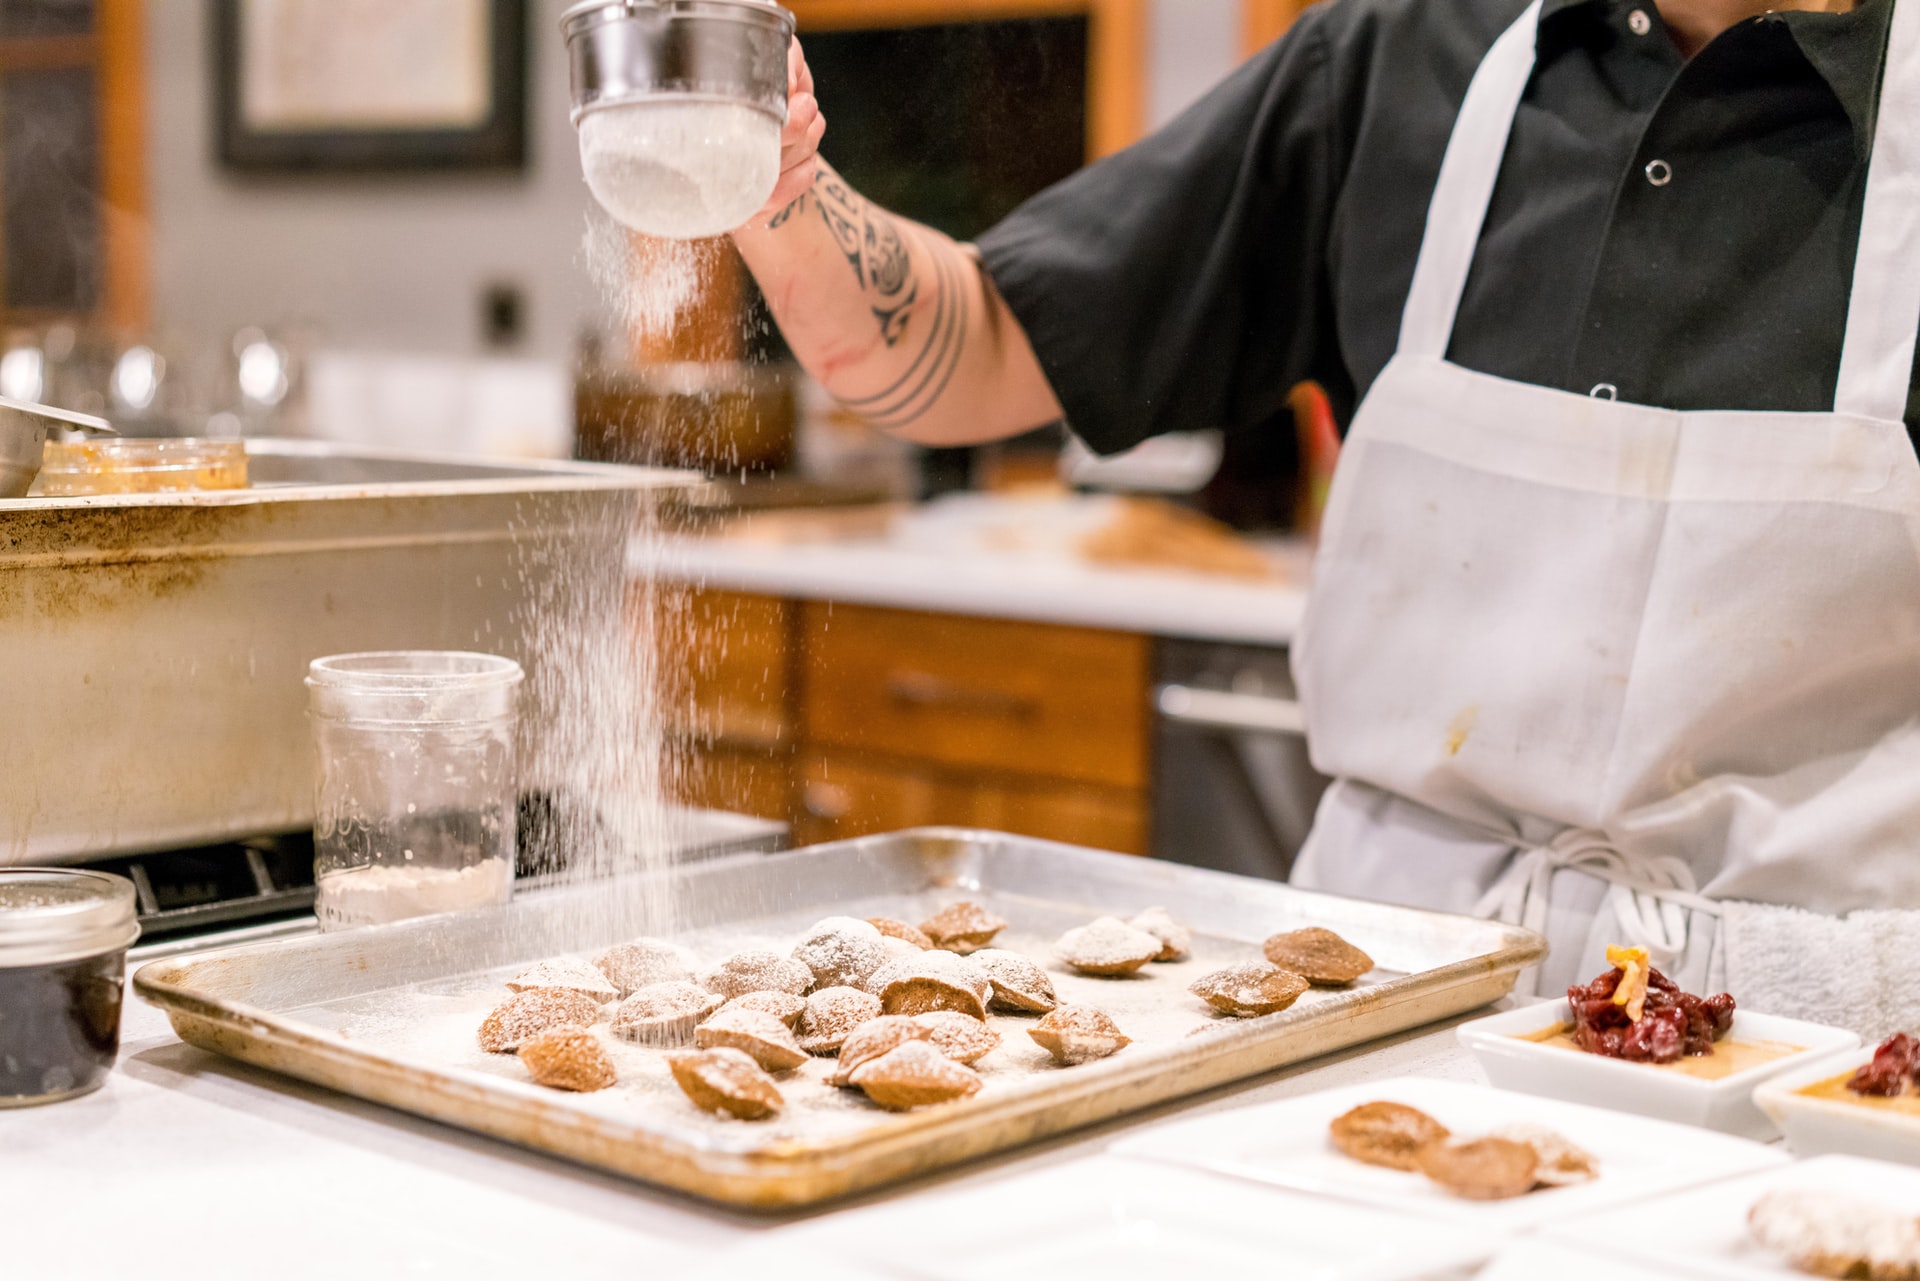 Professional Chefs Share the Most Common Mistakes Amateurs Make